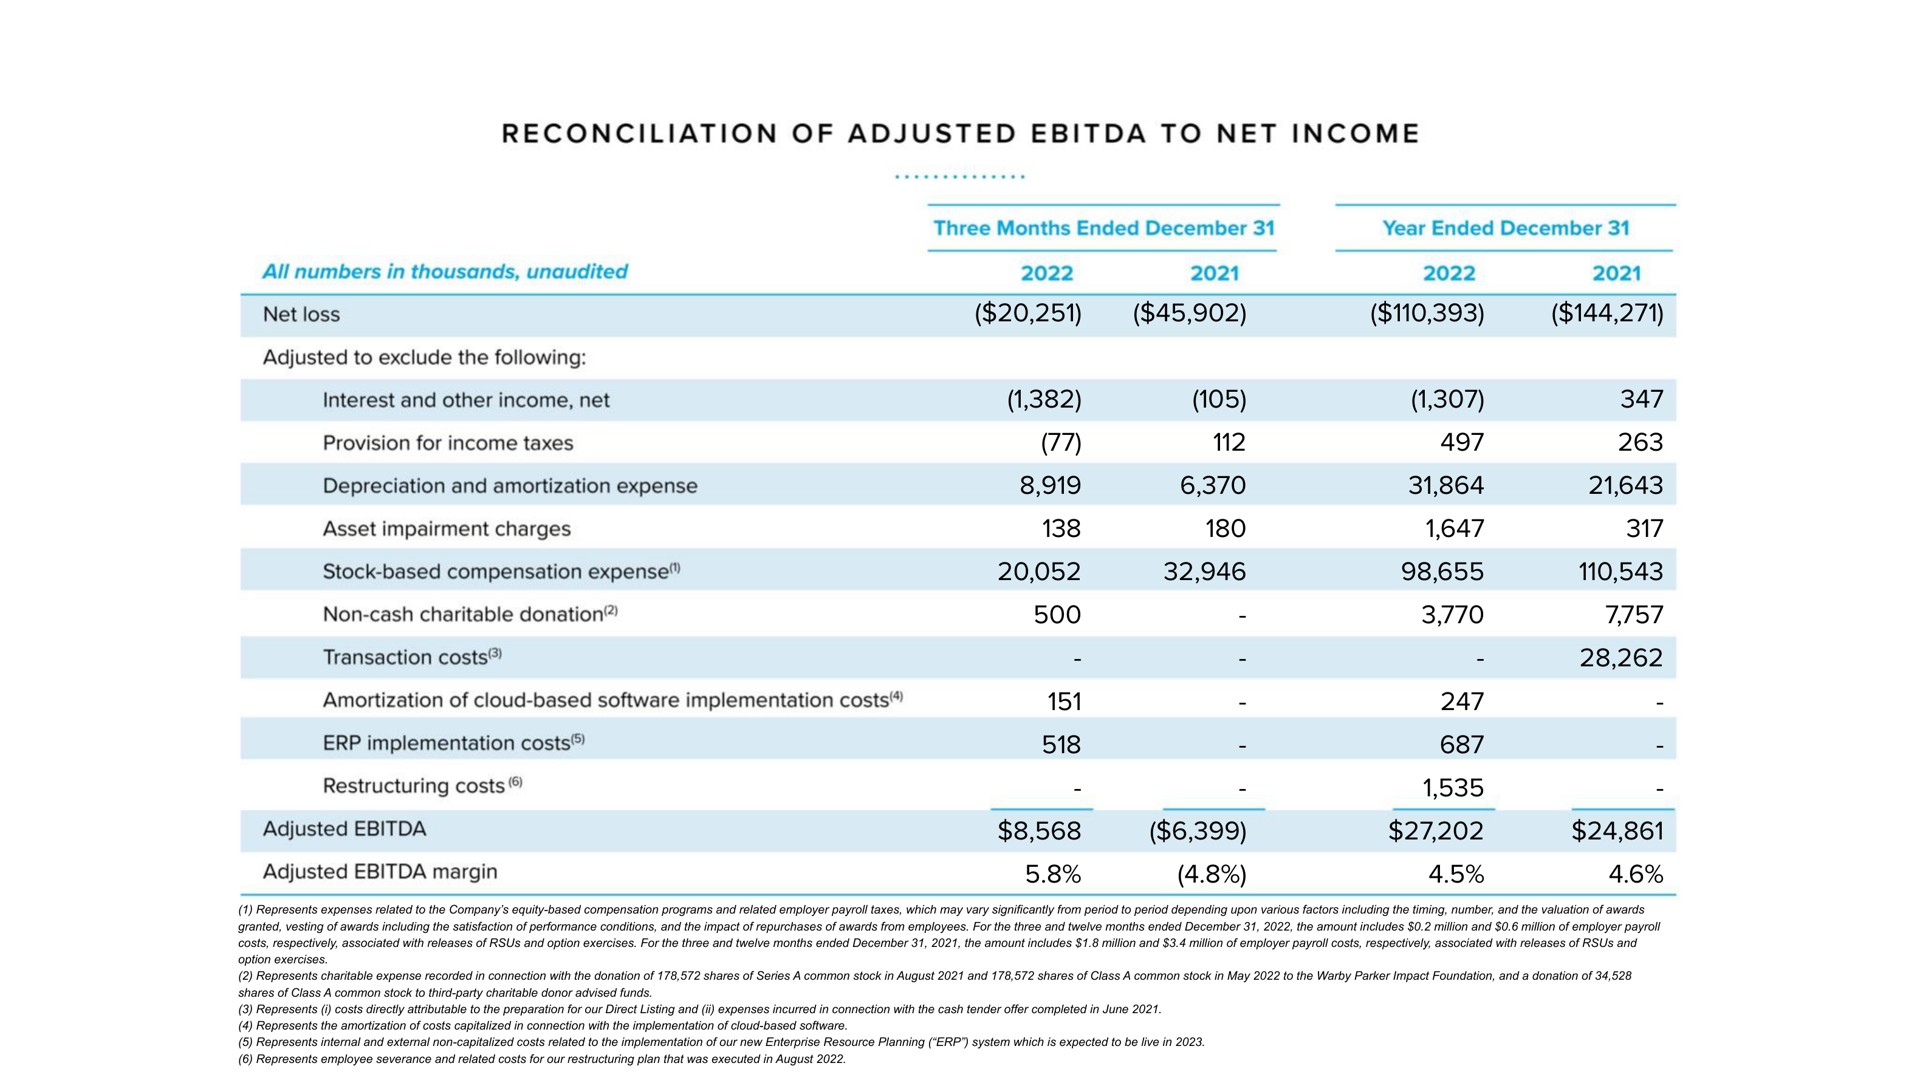 reconciliation of adjusted to net income | Warby Parker